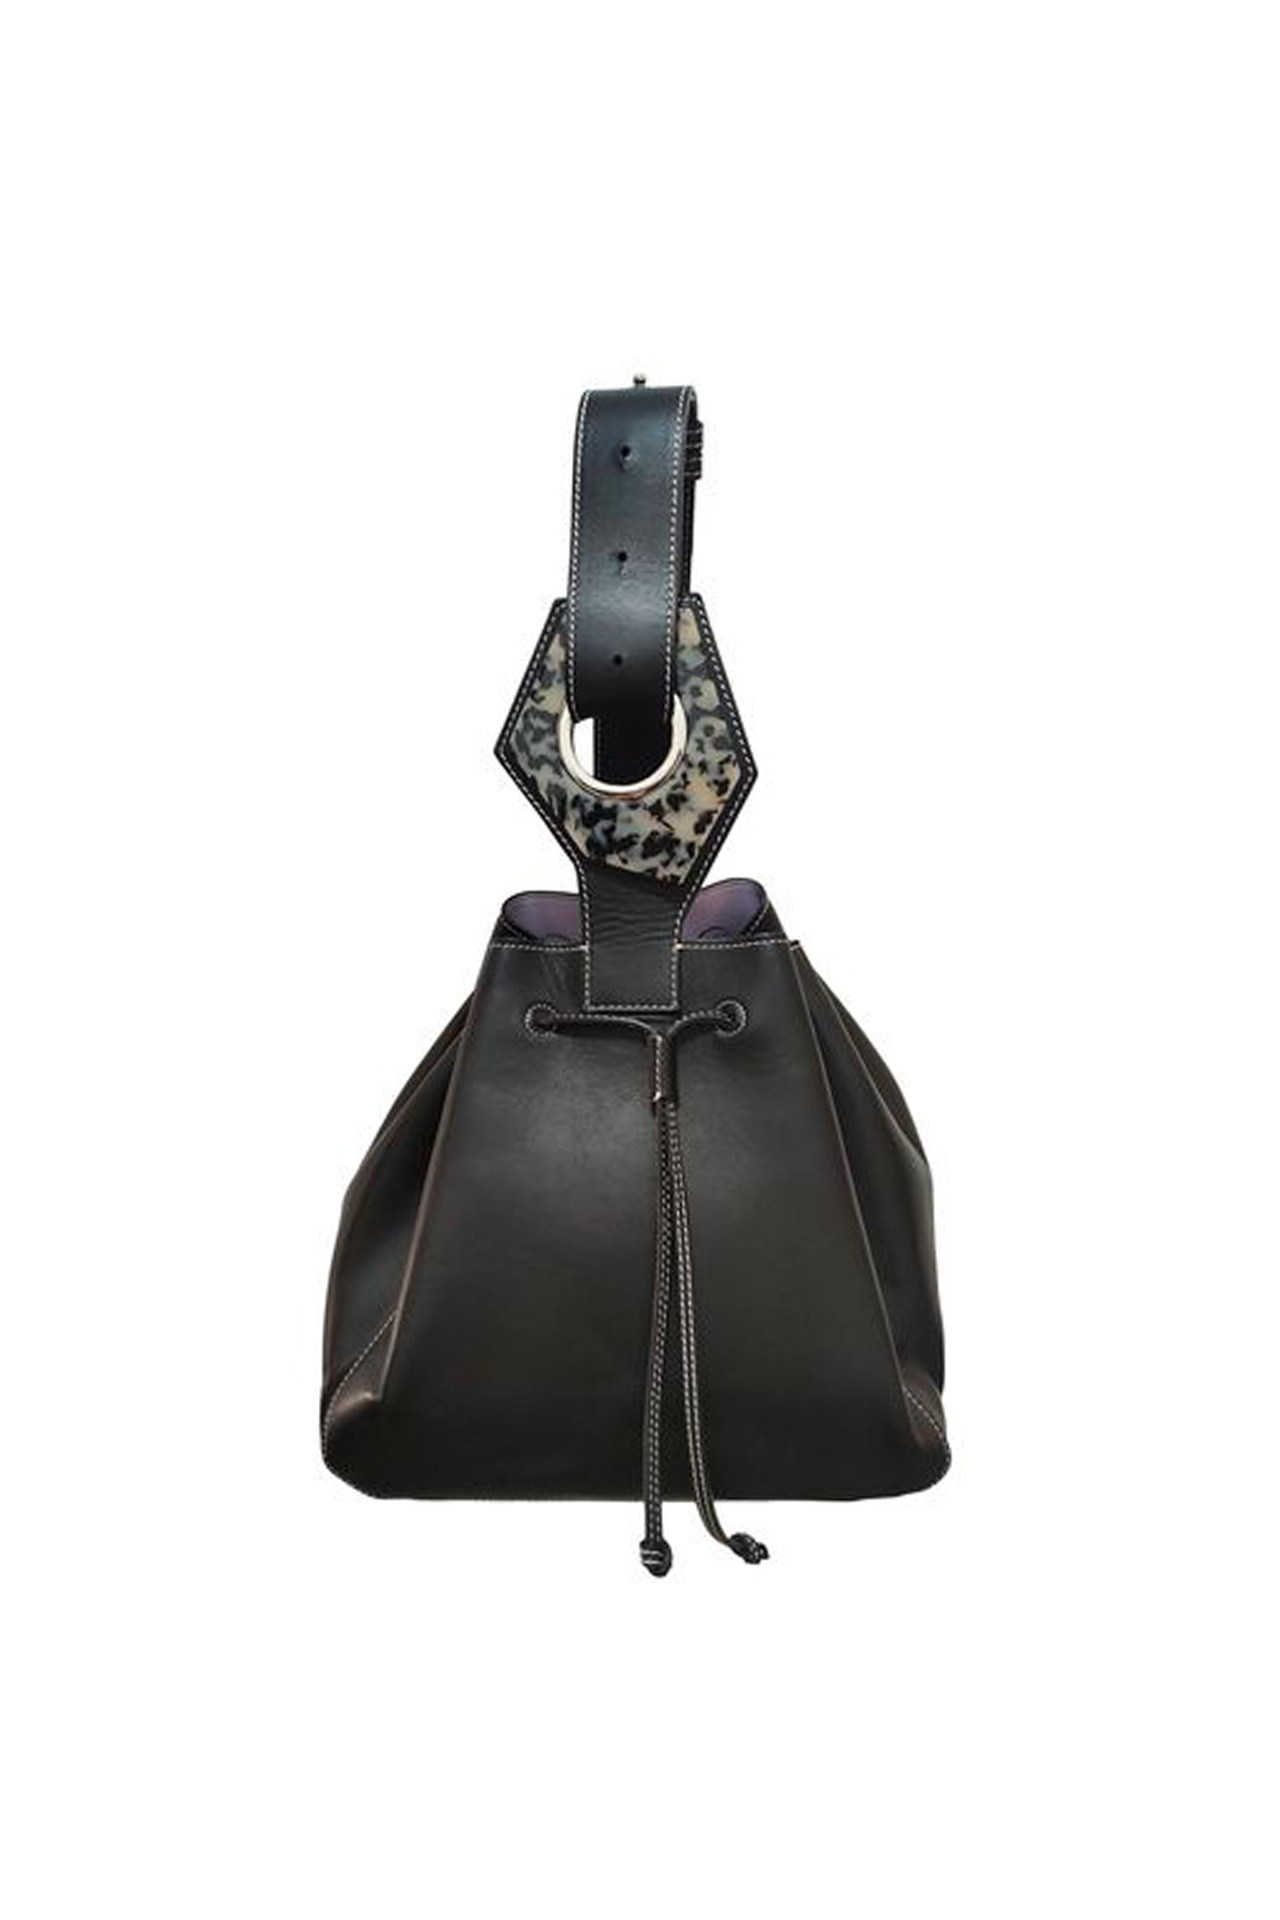 Leather bags for women, second-hand luxury bags - Vestiaire